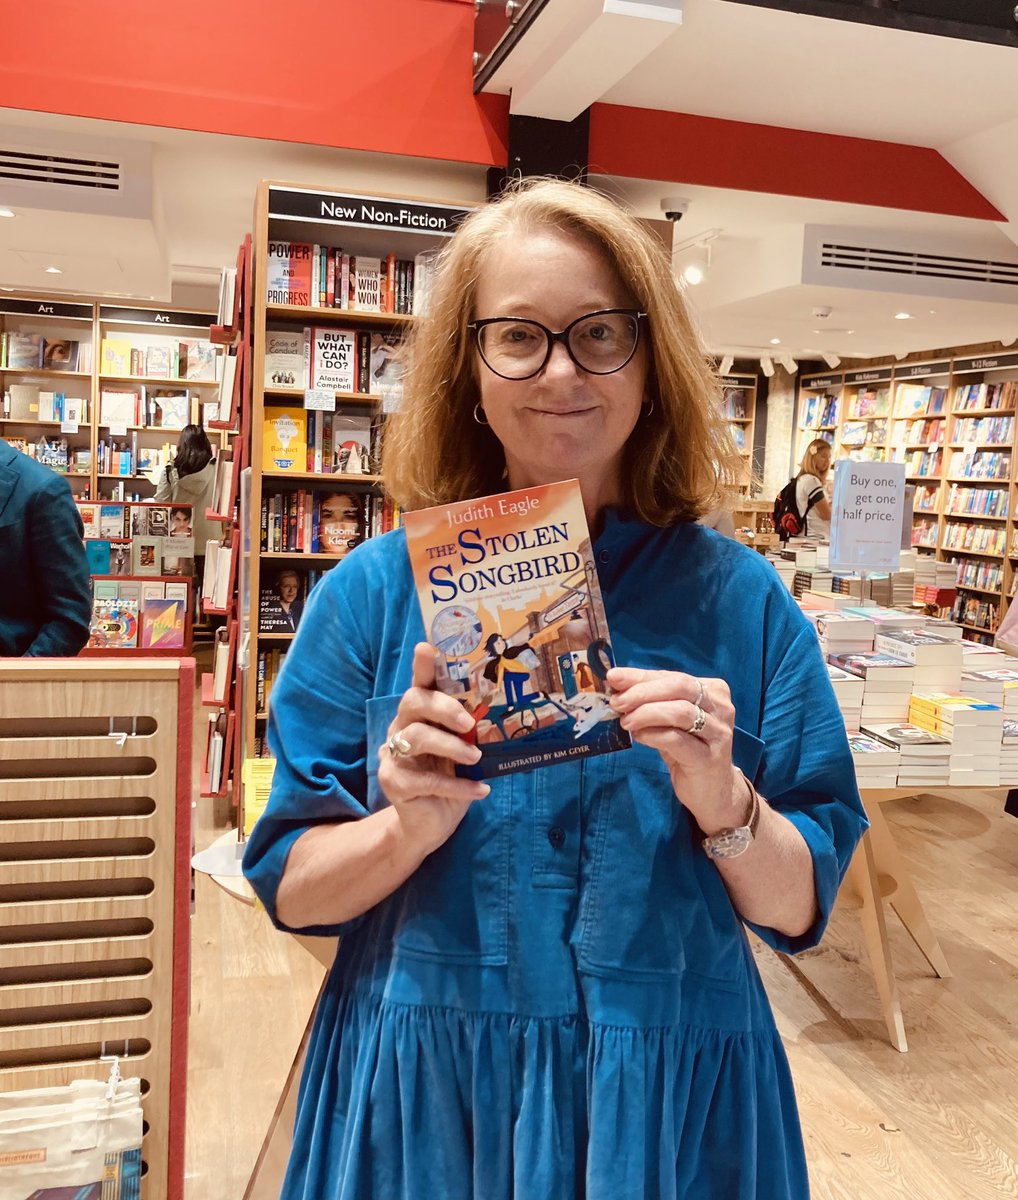 #TheStolenSongbird is set in 1950’s Waterloo, just round the corner from the station. So it was lovely to pop into the new  @Foyles and sign some copies practically in situ! Thank you booksellers Imaan and Giuseppe for the warm welcome! @FaberChildrens